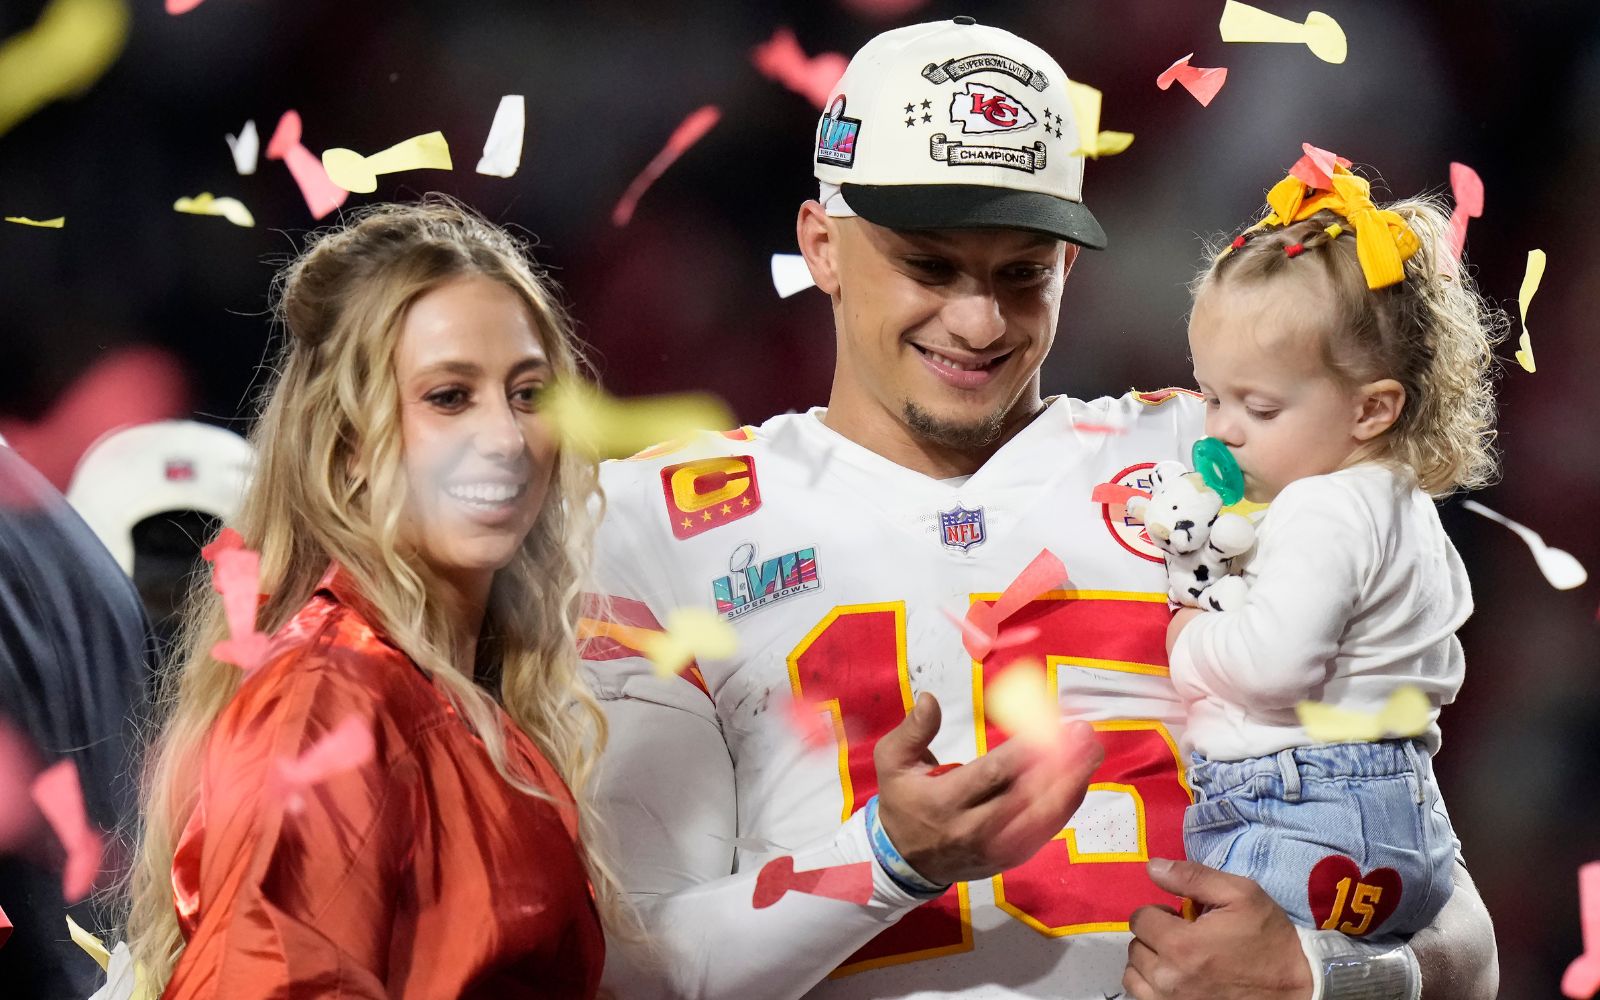 Patrick Mahomes and his wife Brittany celebrate first anniversary